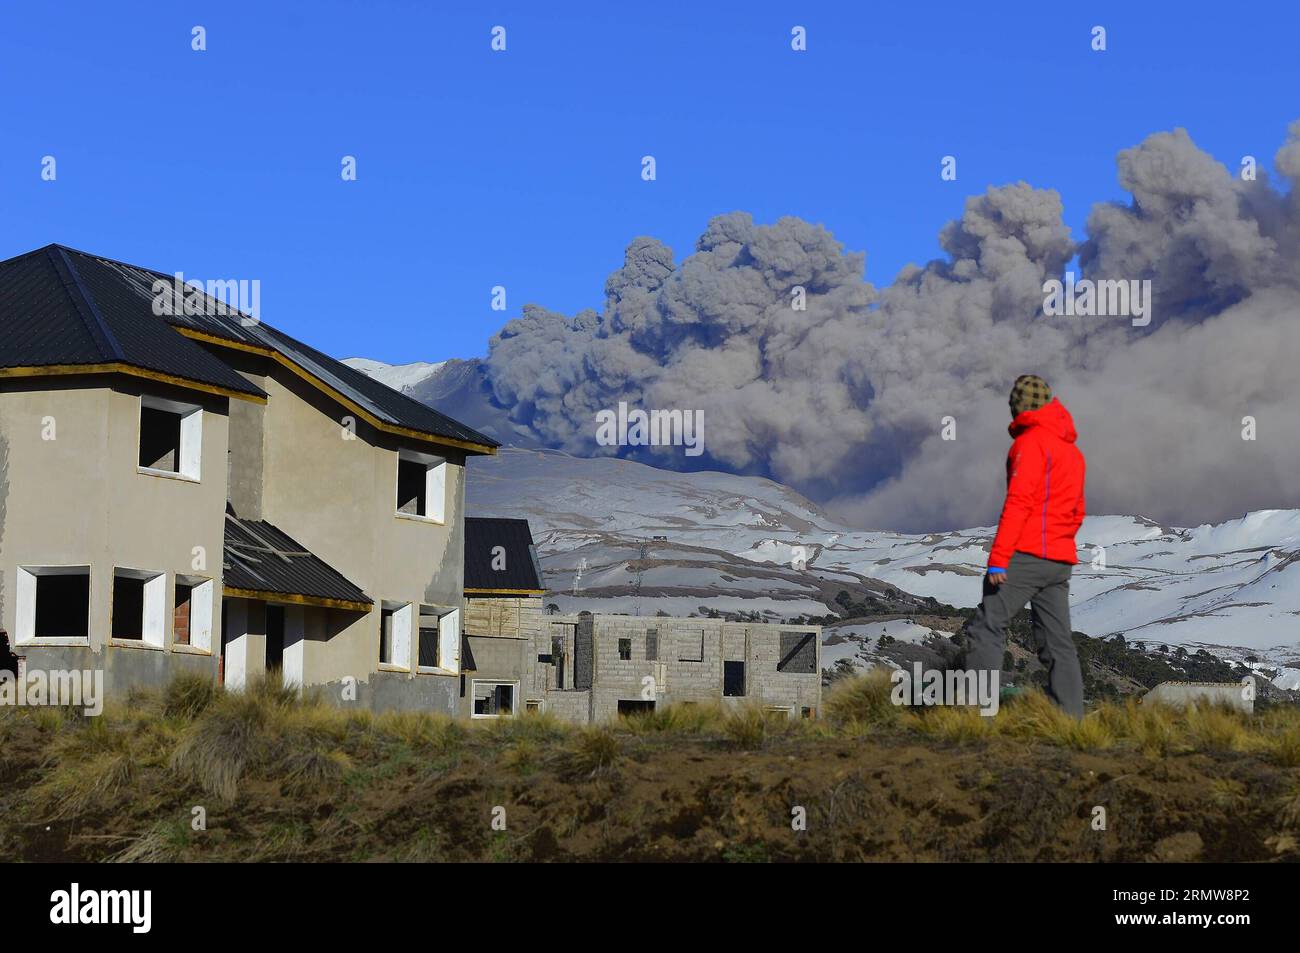 A man observes smoke rising from the crater of Copahue Volcano, in Biobio region, Chile, on Oct. 12, 2014. The Copahue Volcano started to show activity on Saturday, therefore Chile s National Service of Mining and Geology rose the alert to orange. Rodrigo Alvarez, National Director of Chile s National Service of Mining and Geology, informed that in the last hours there have been detected traces of ashes and sulfur emanations in a zone near the volcano, in Biobio region, according to local press. Francisco Negroni/) (dzl) CHILE-BIOBIO-VOLCANO-ACTIVITY AGENCIAxUNO PUBLICATIONxNOTxINxCHN   a Man Stock Photo